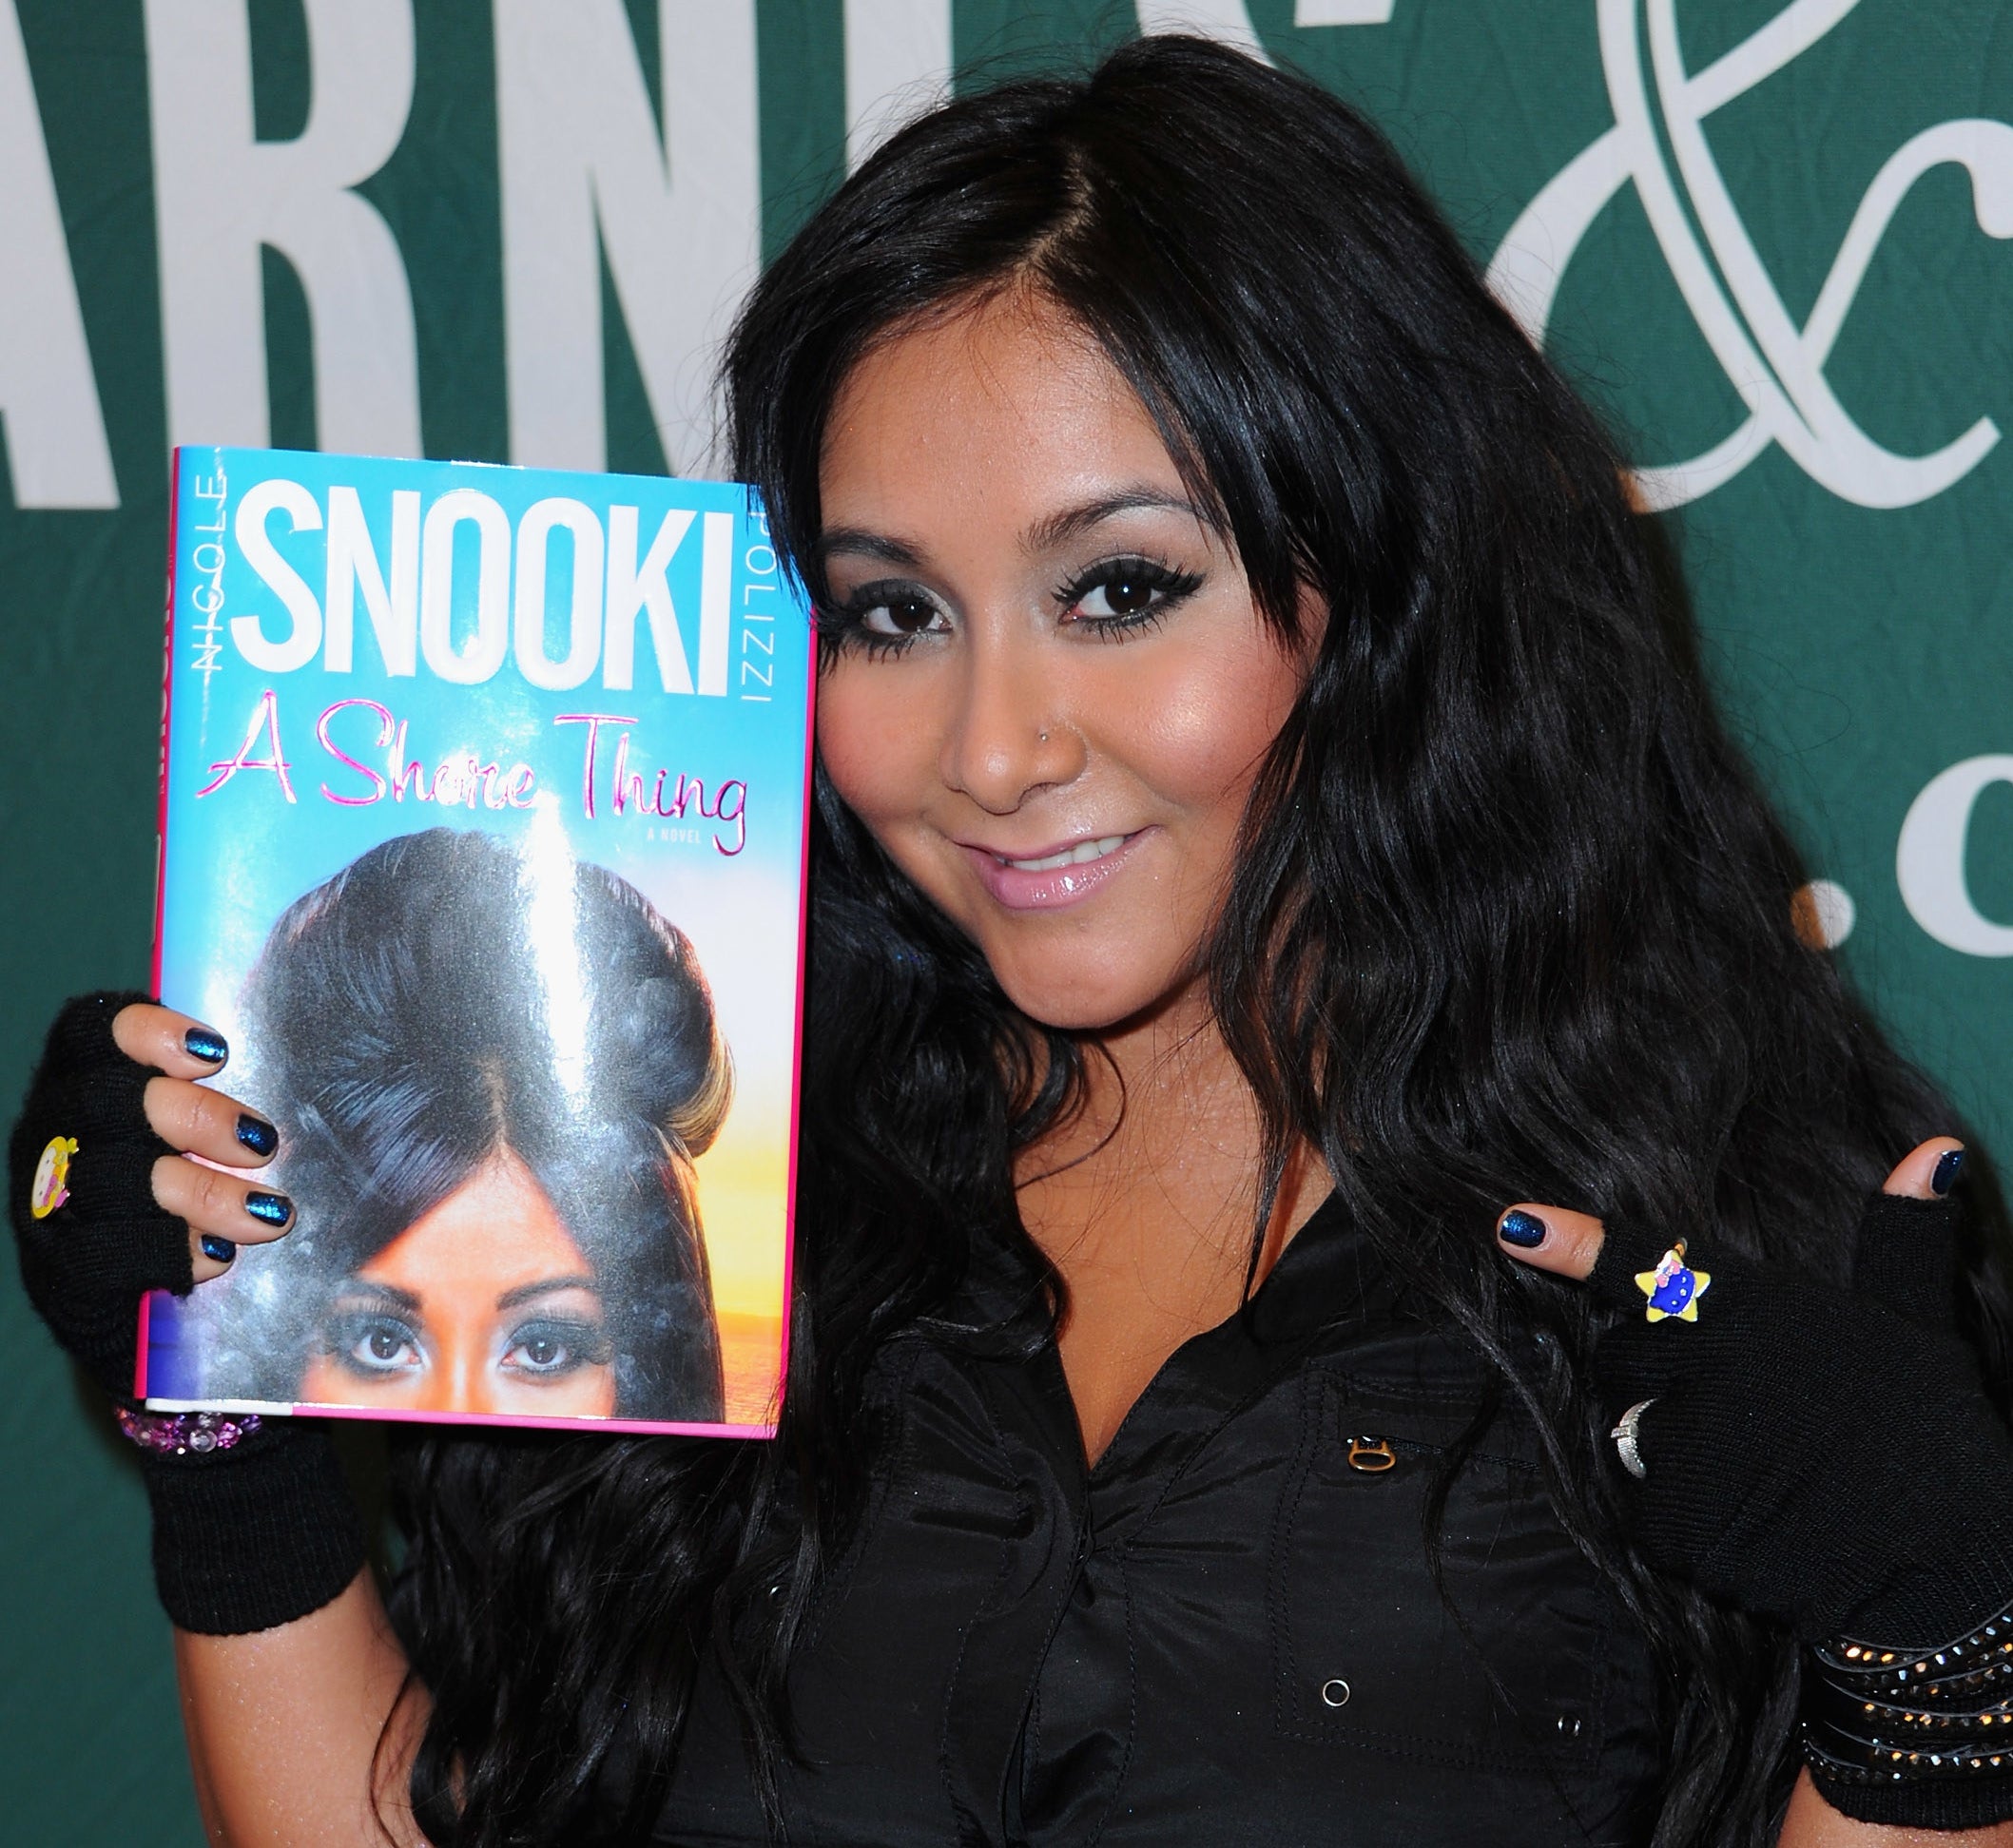 Nicole &quot;Snooki&quot; Polizzi posing with her book &quot;A Shore Thing&quot;